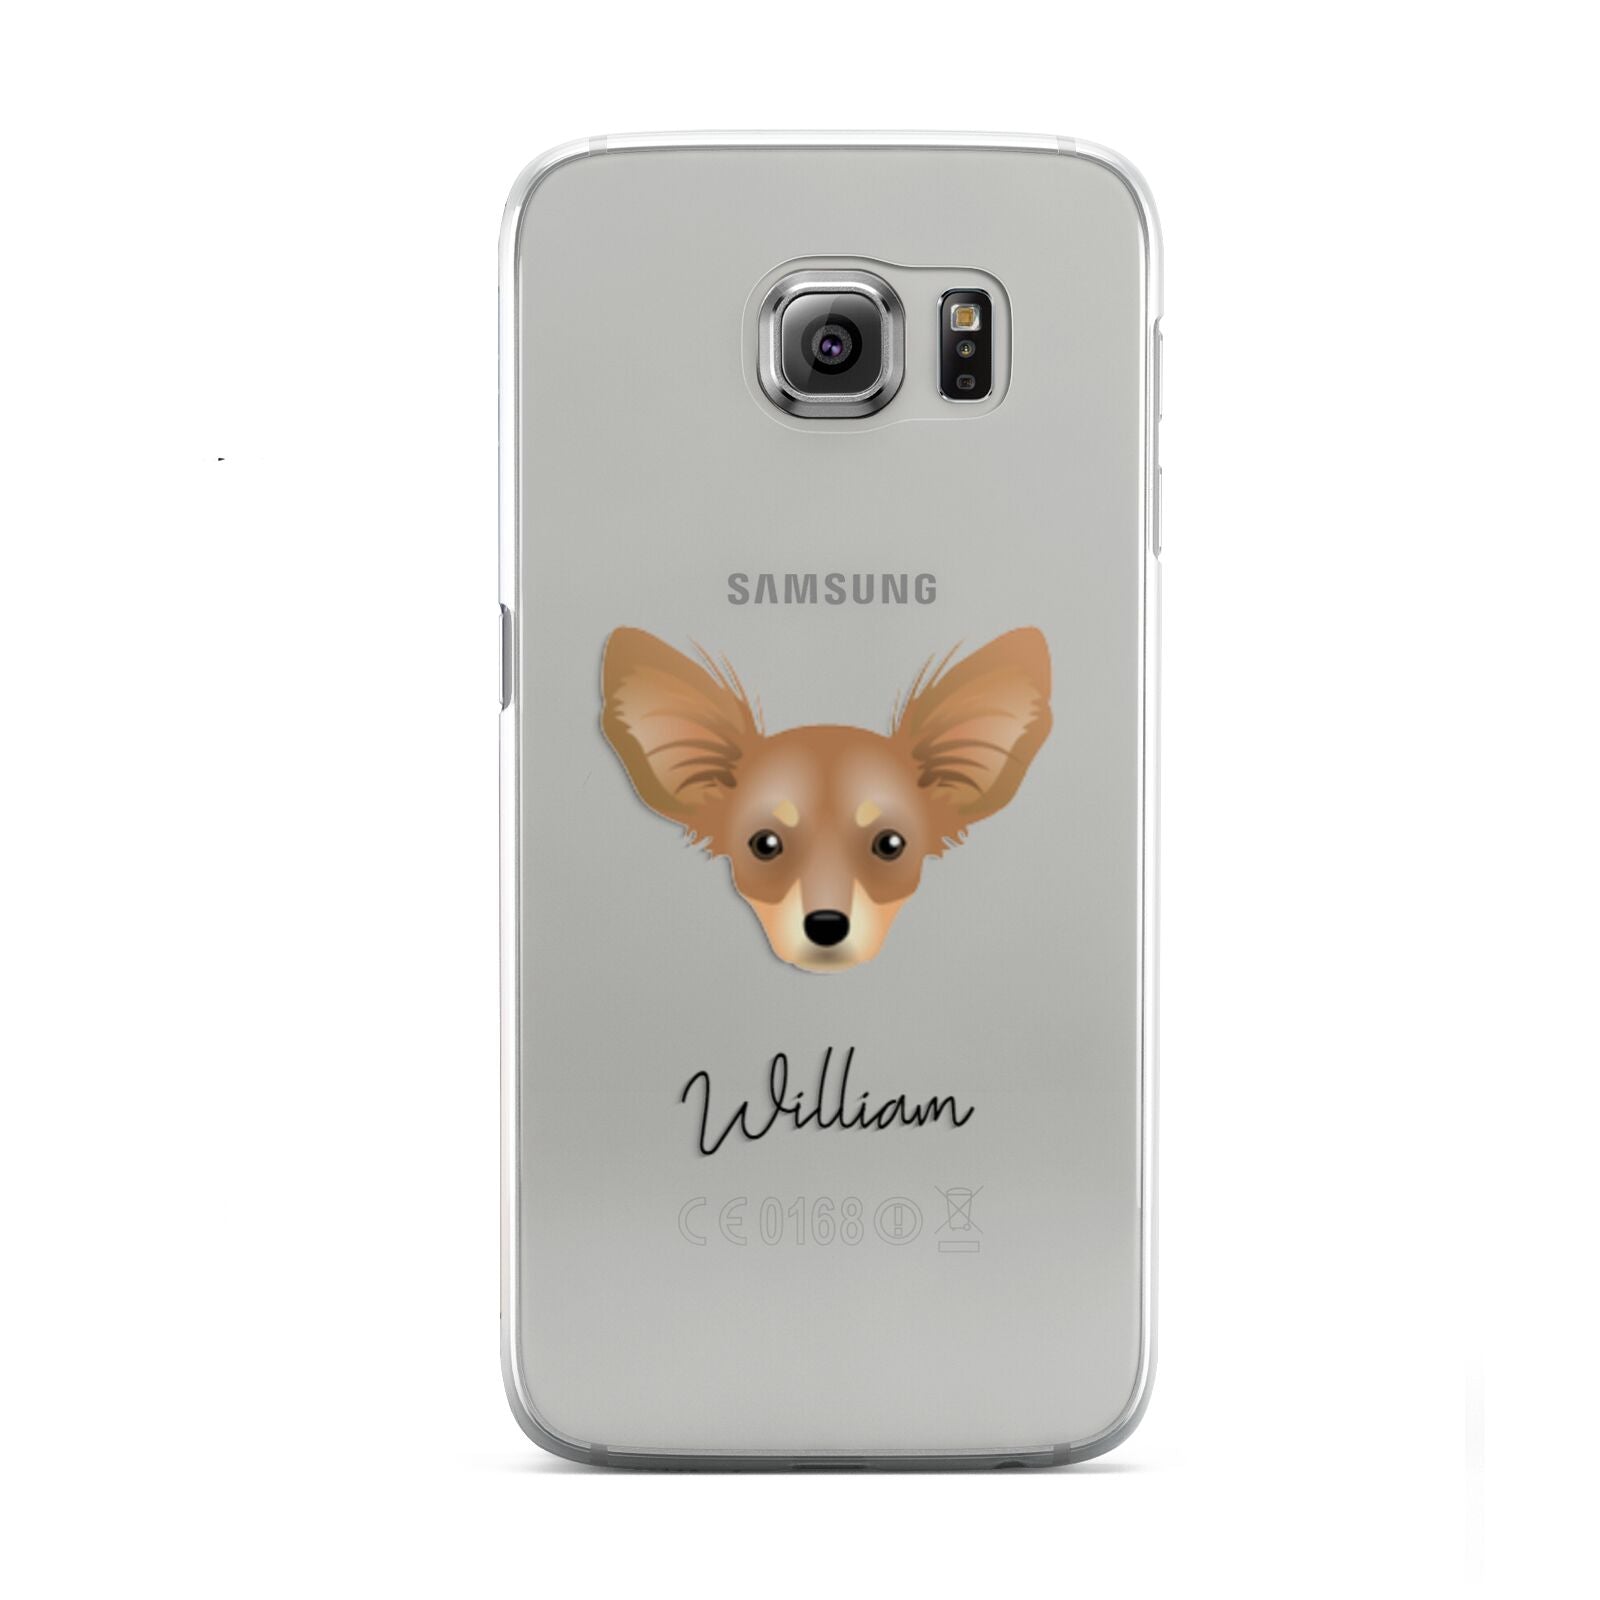 Russian Toy Personalised Samsung Galaxy S6 Case